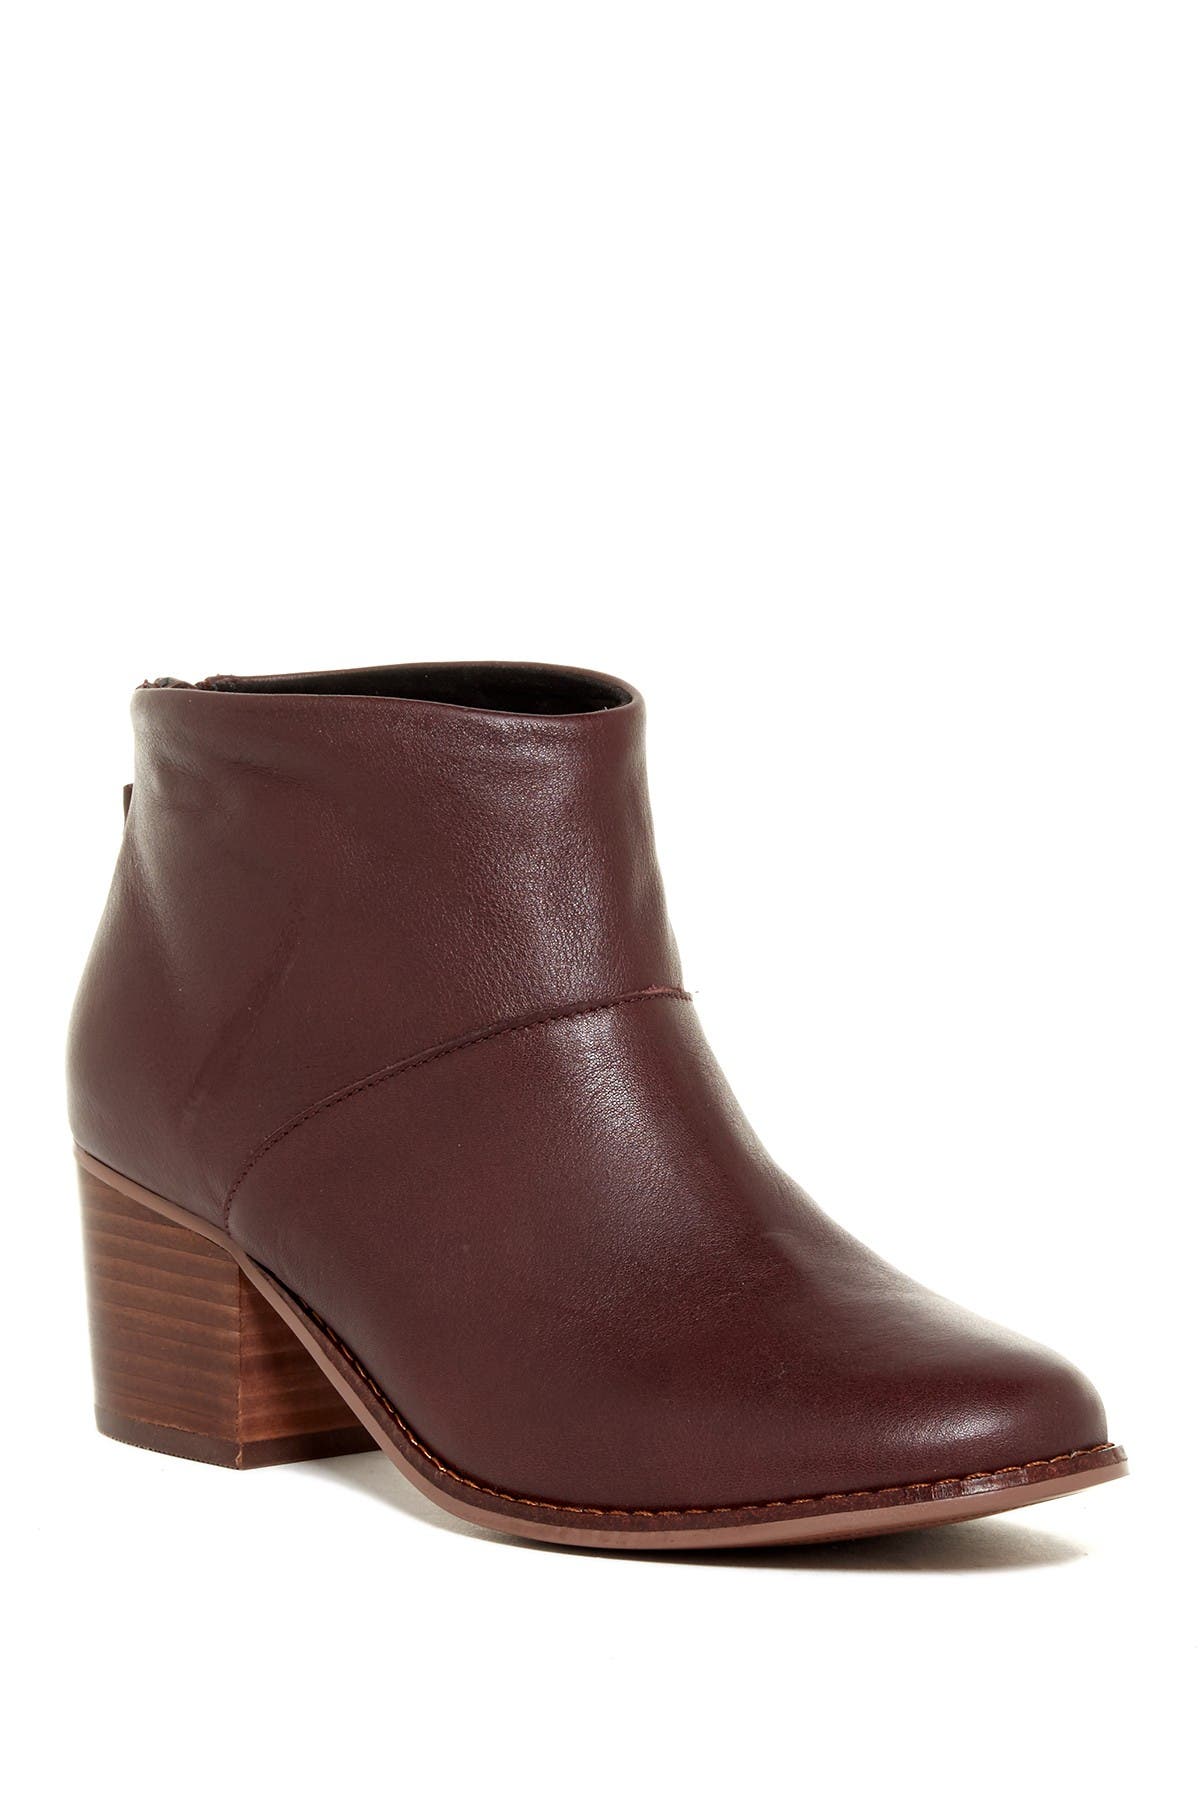 toms leila leather bootie